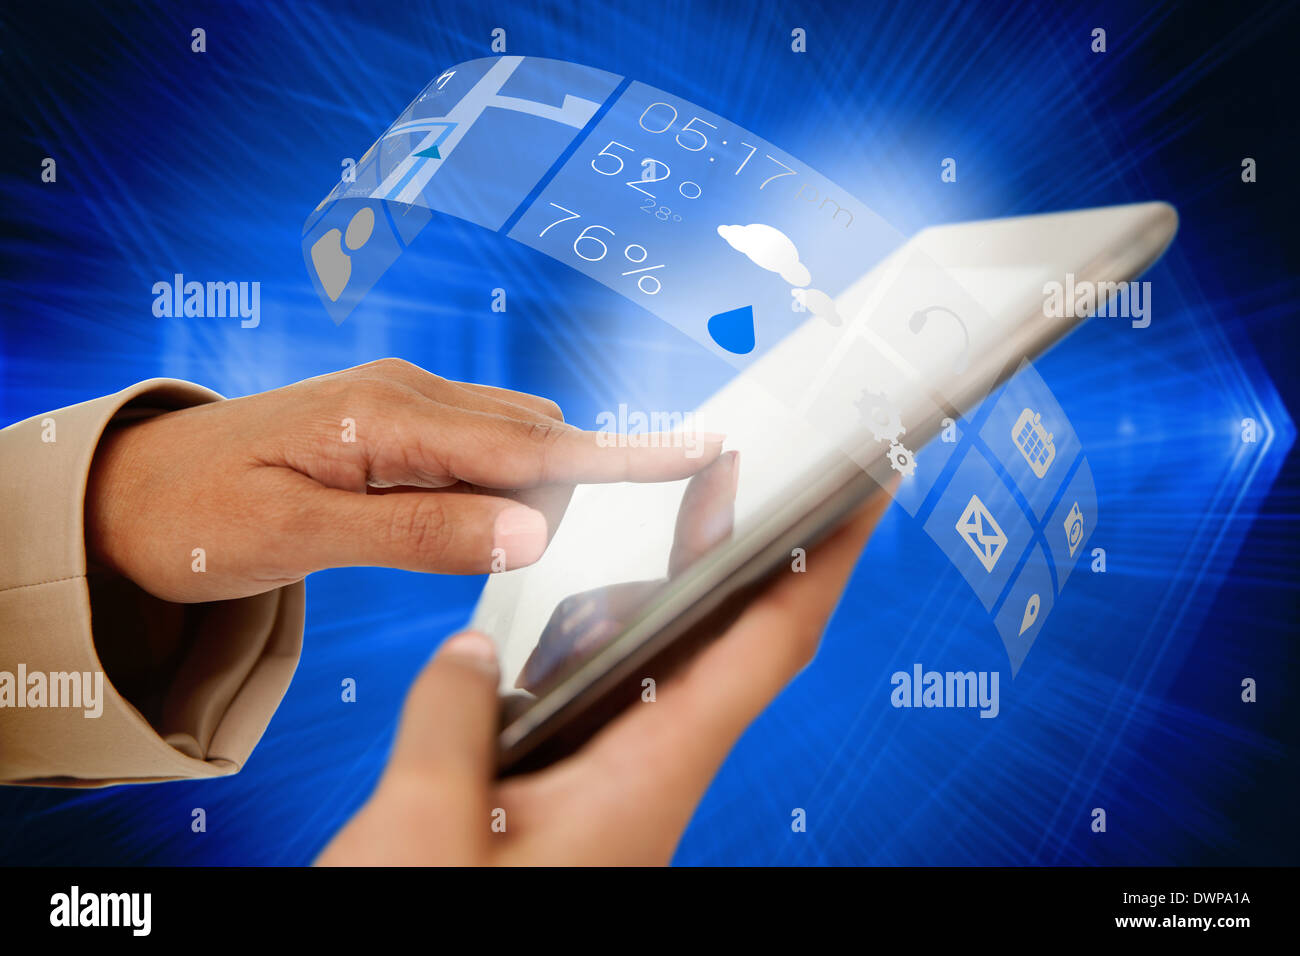 Businesswoman touching tablet with app interface Stock Photo